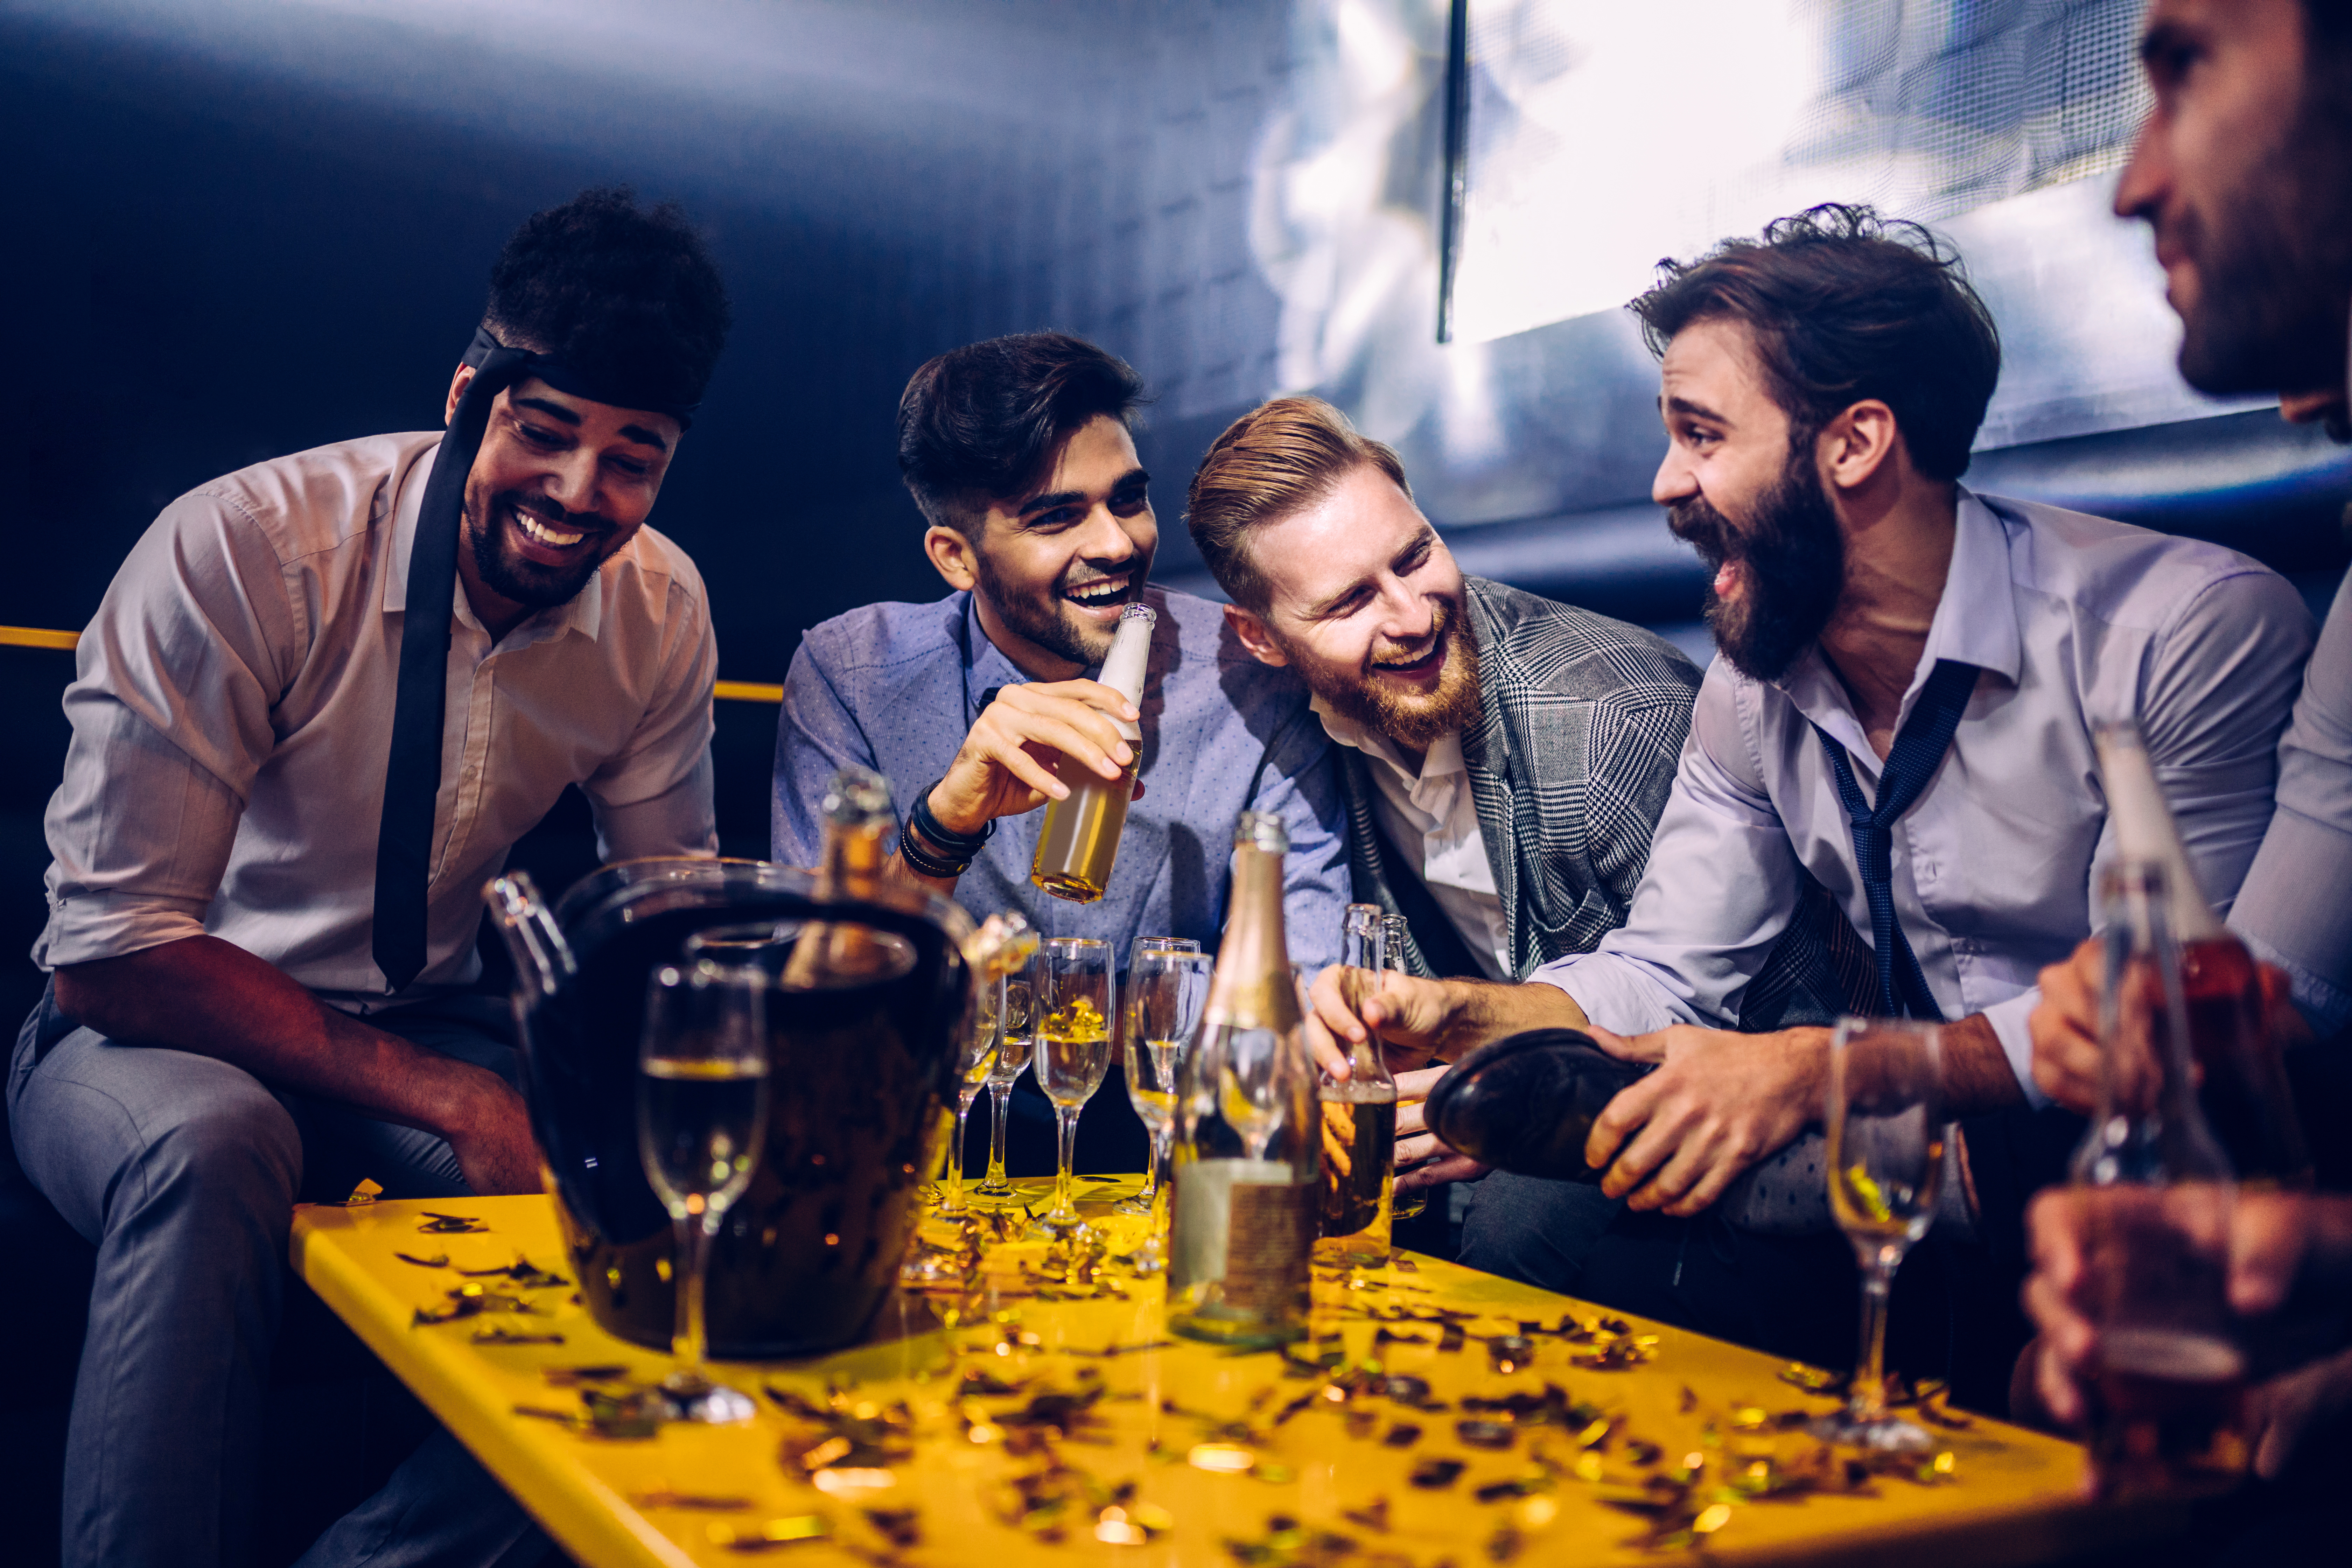 Group of young men drinking at a nightclub